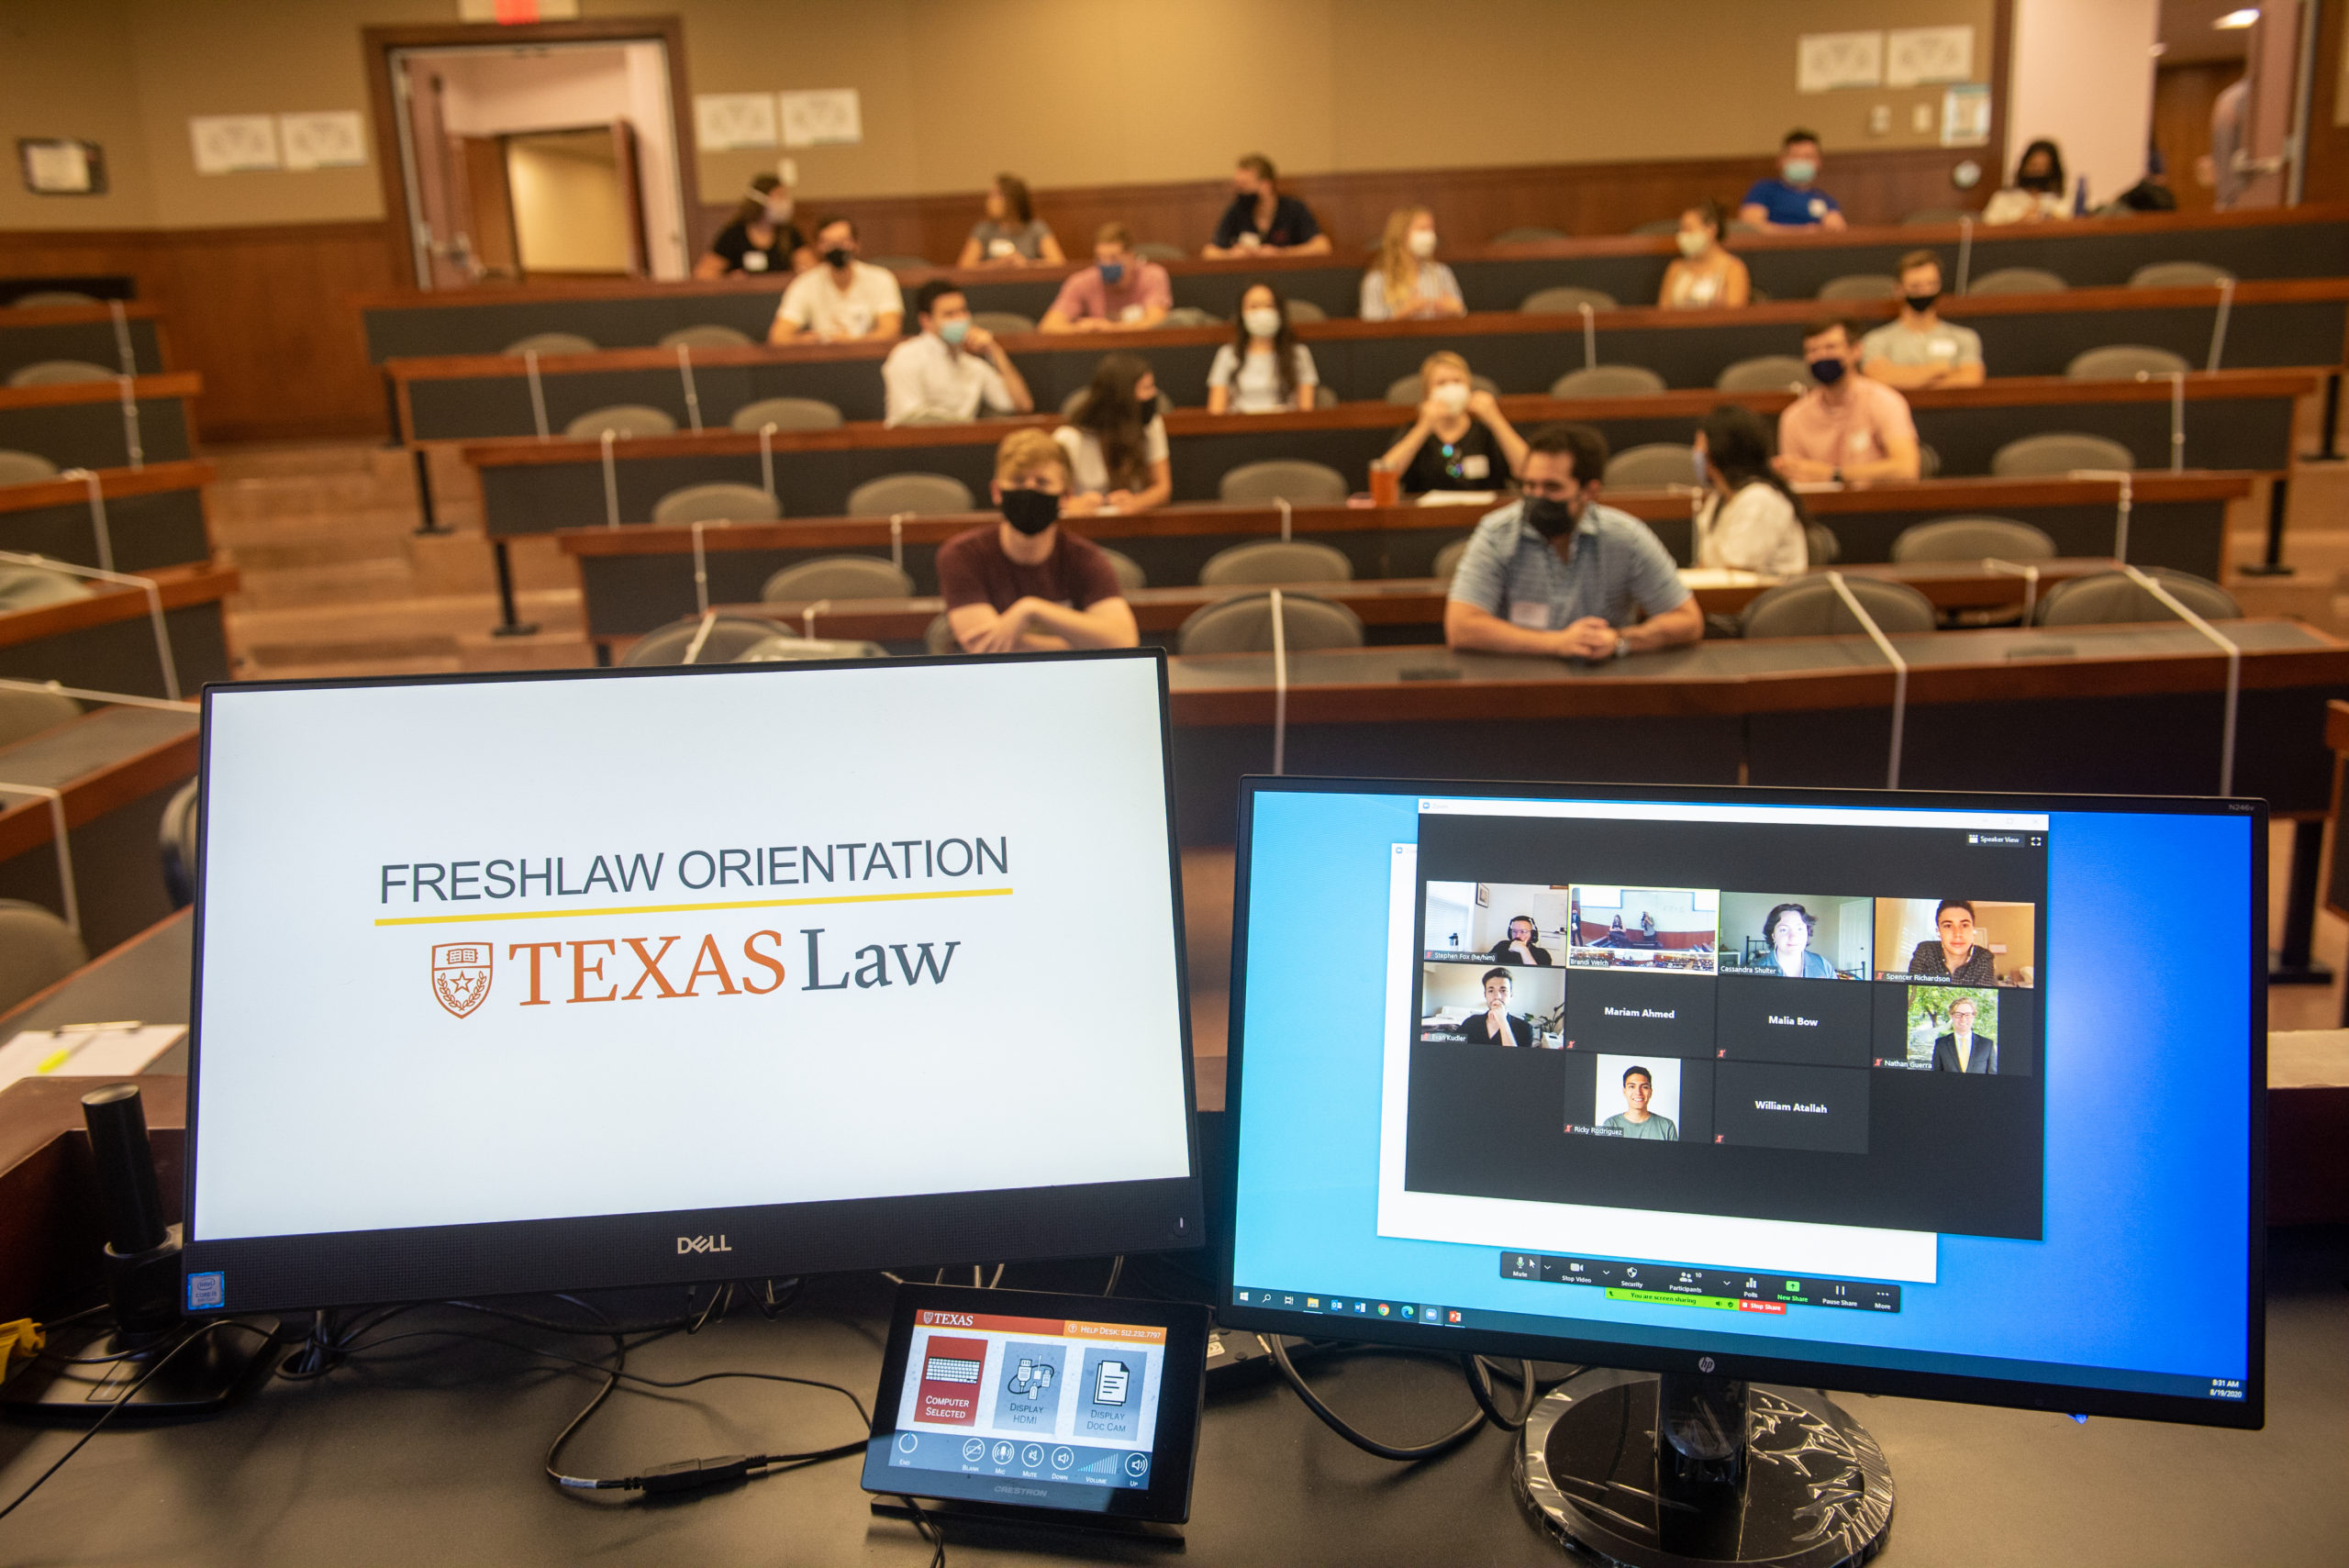 Two computer screens, one showing a Zoom screen, and one showing the Freshlaw Orientation slide, in a room full of students at orientation.